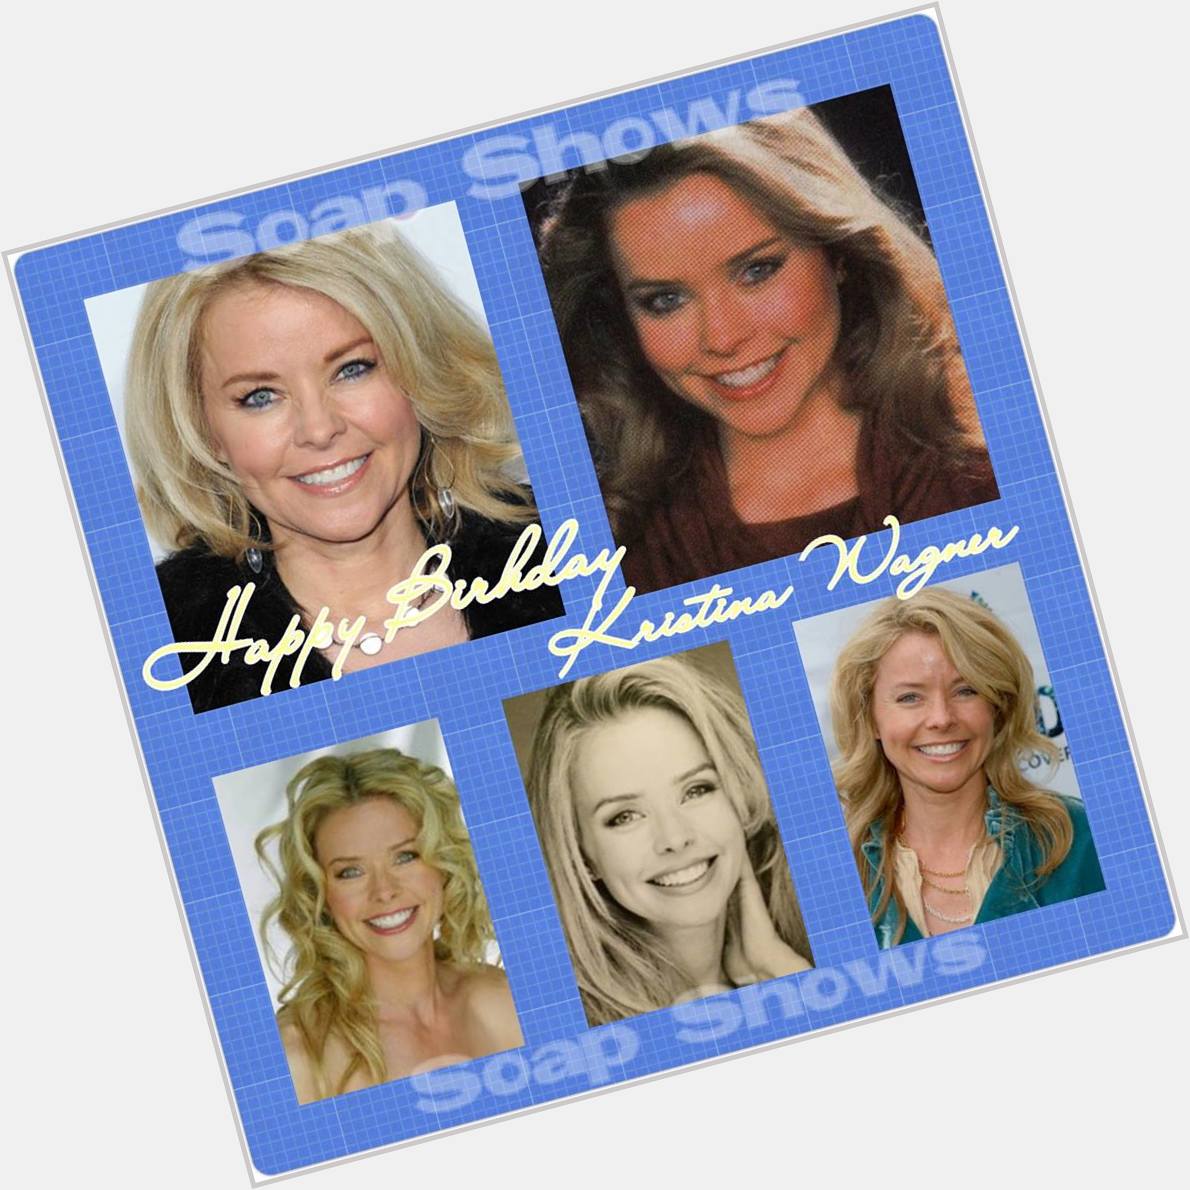 Happy Birthday, Kristina Wagner! Have a beautiful day full of laughter and sunshine! 